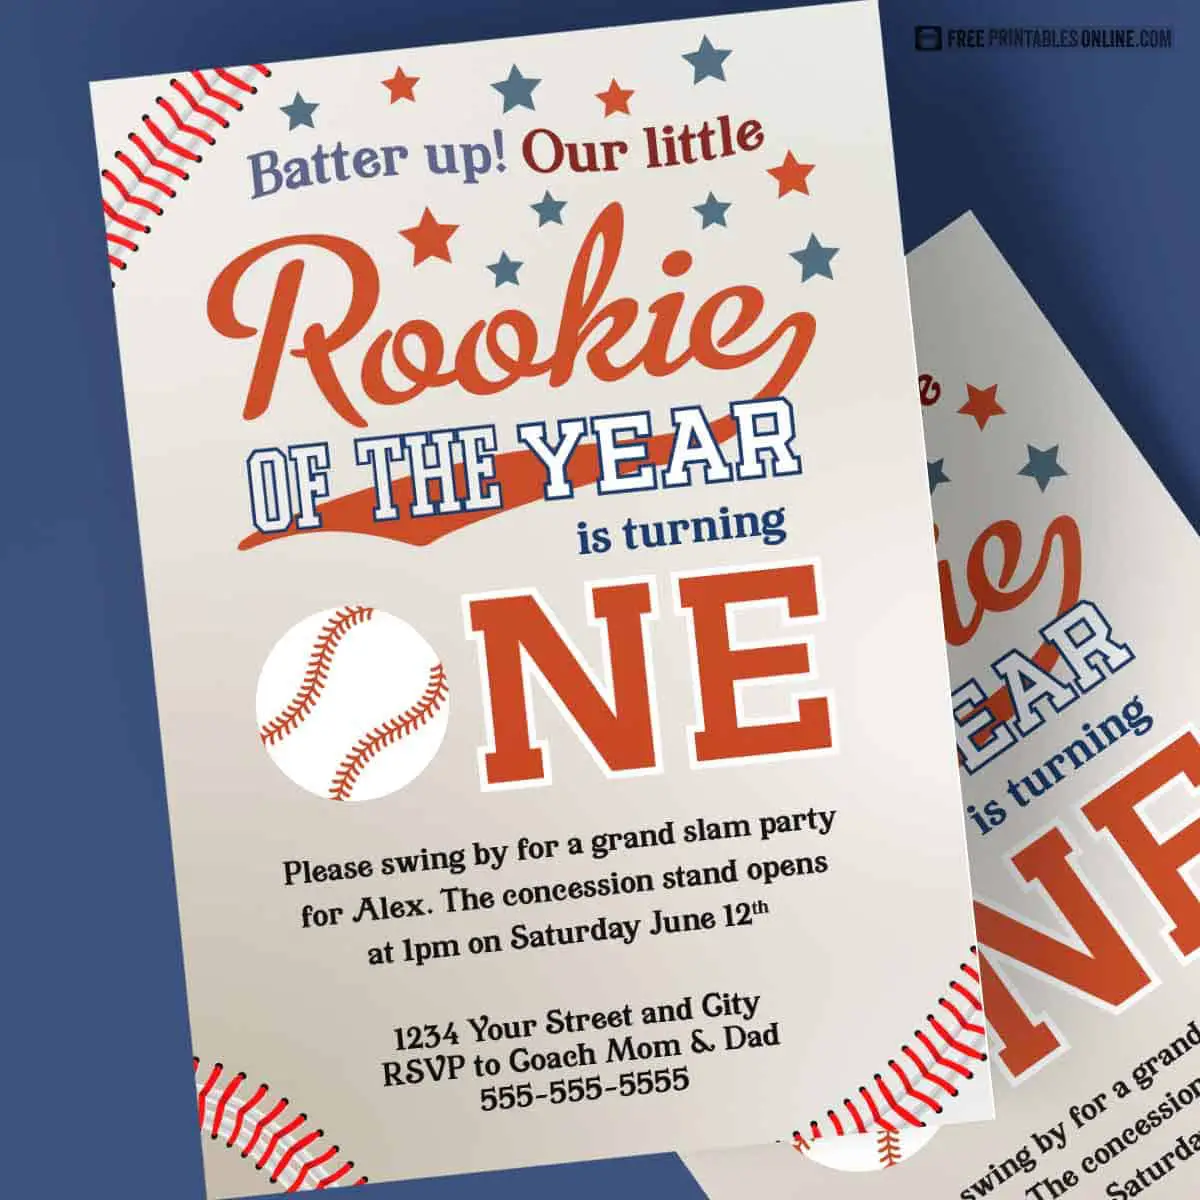 Rookie of the year first birthday party invitation - Free Printables Online